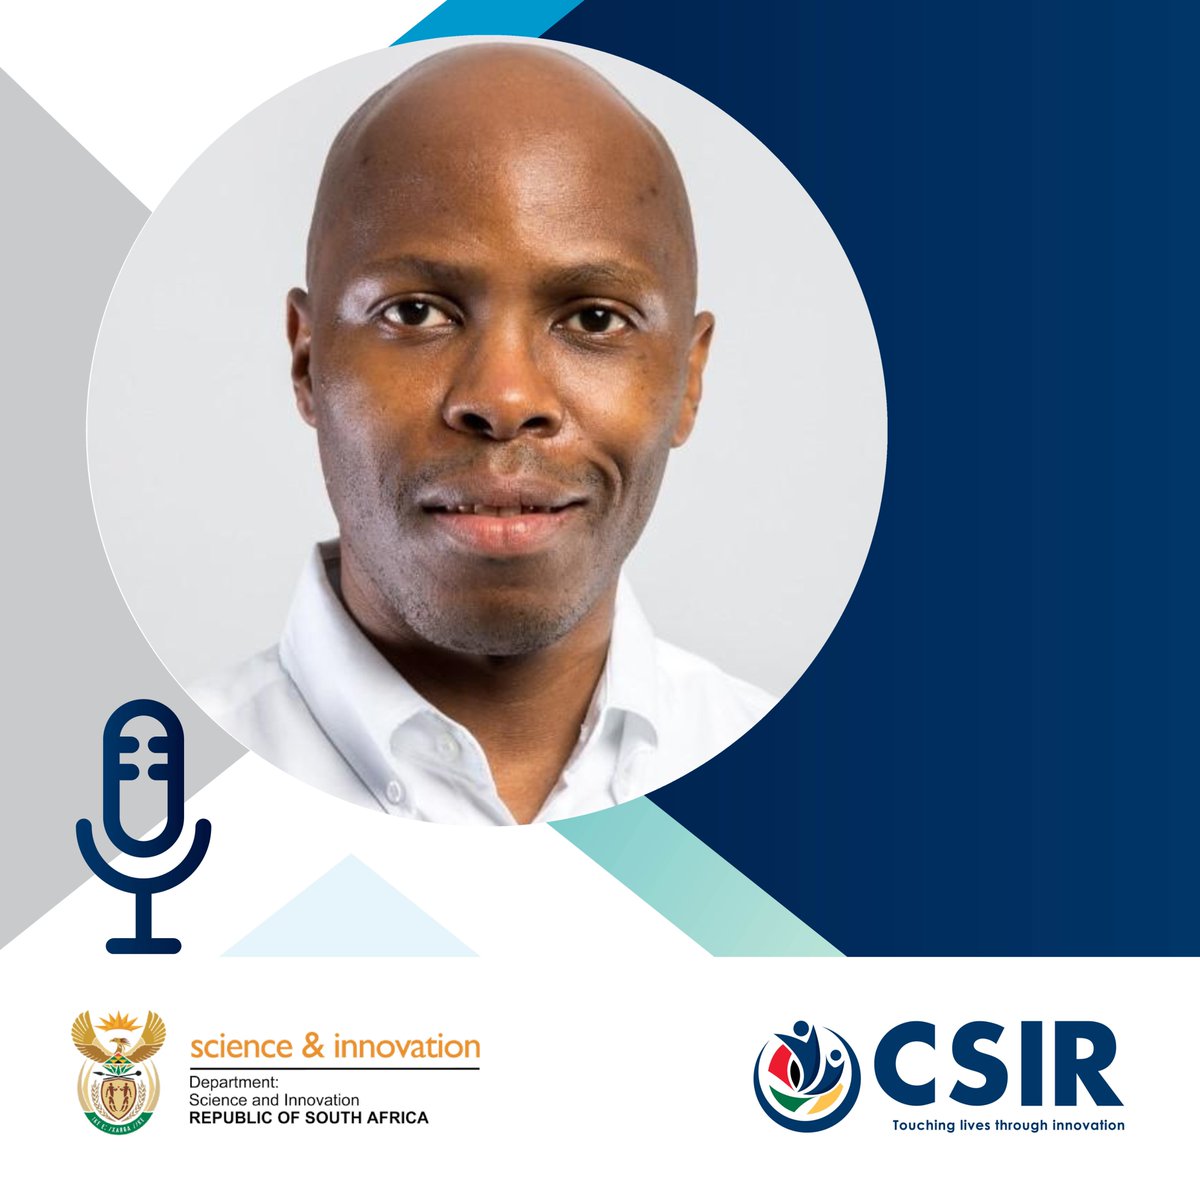 Catch #TeamCSIR Chief Researcher and CSIR Information and Cybersecurity Research Centre Manager, Dr Jabu Mtsweni, today at 5:50am on @ligwalagwalaFM as he speaks about the role of the CSIR at #SAelections24. Don't miss it!